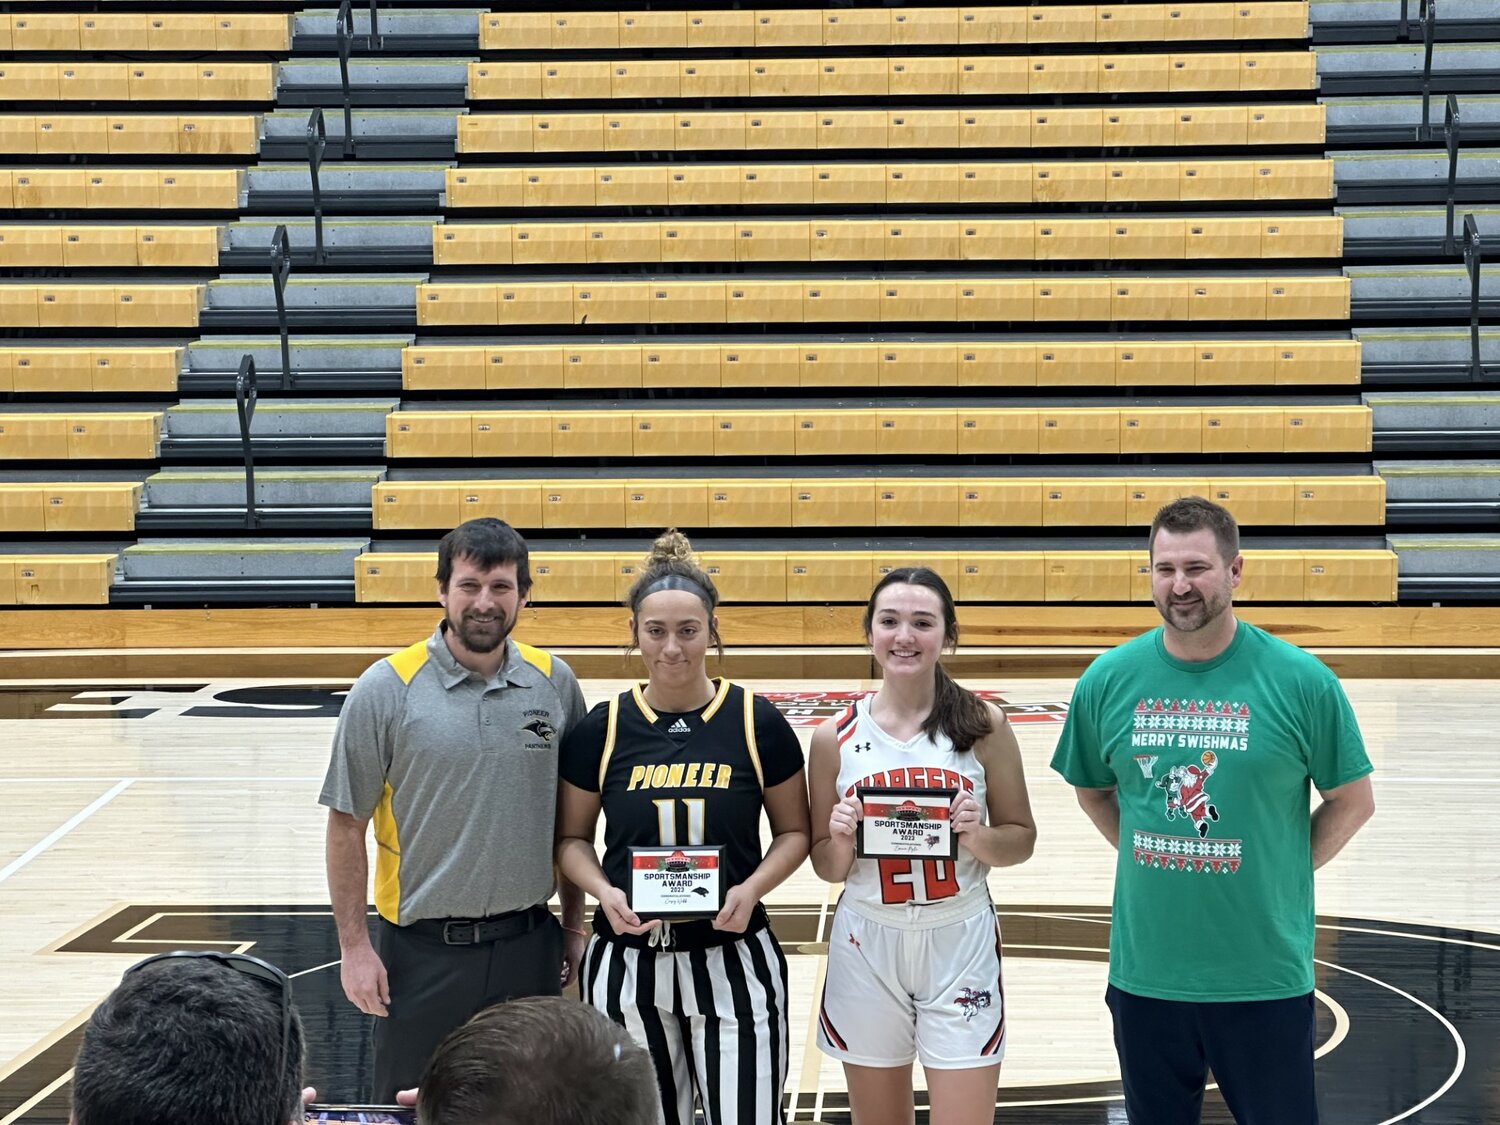 Emma Pyle was also presented with the sportsmanship award that is handed out to one player from each of the teams.